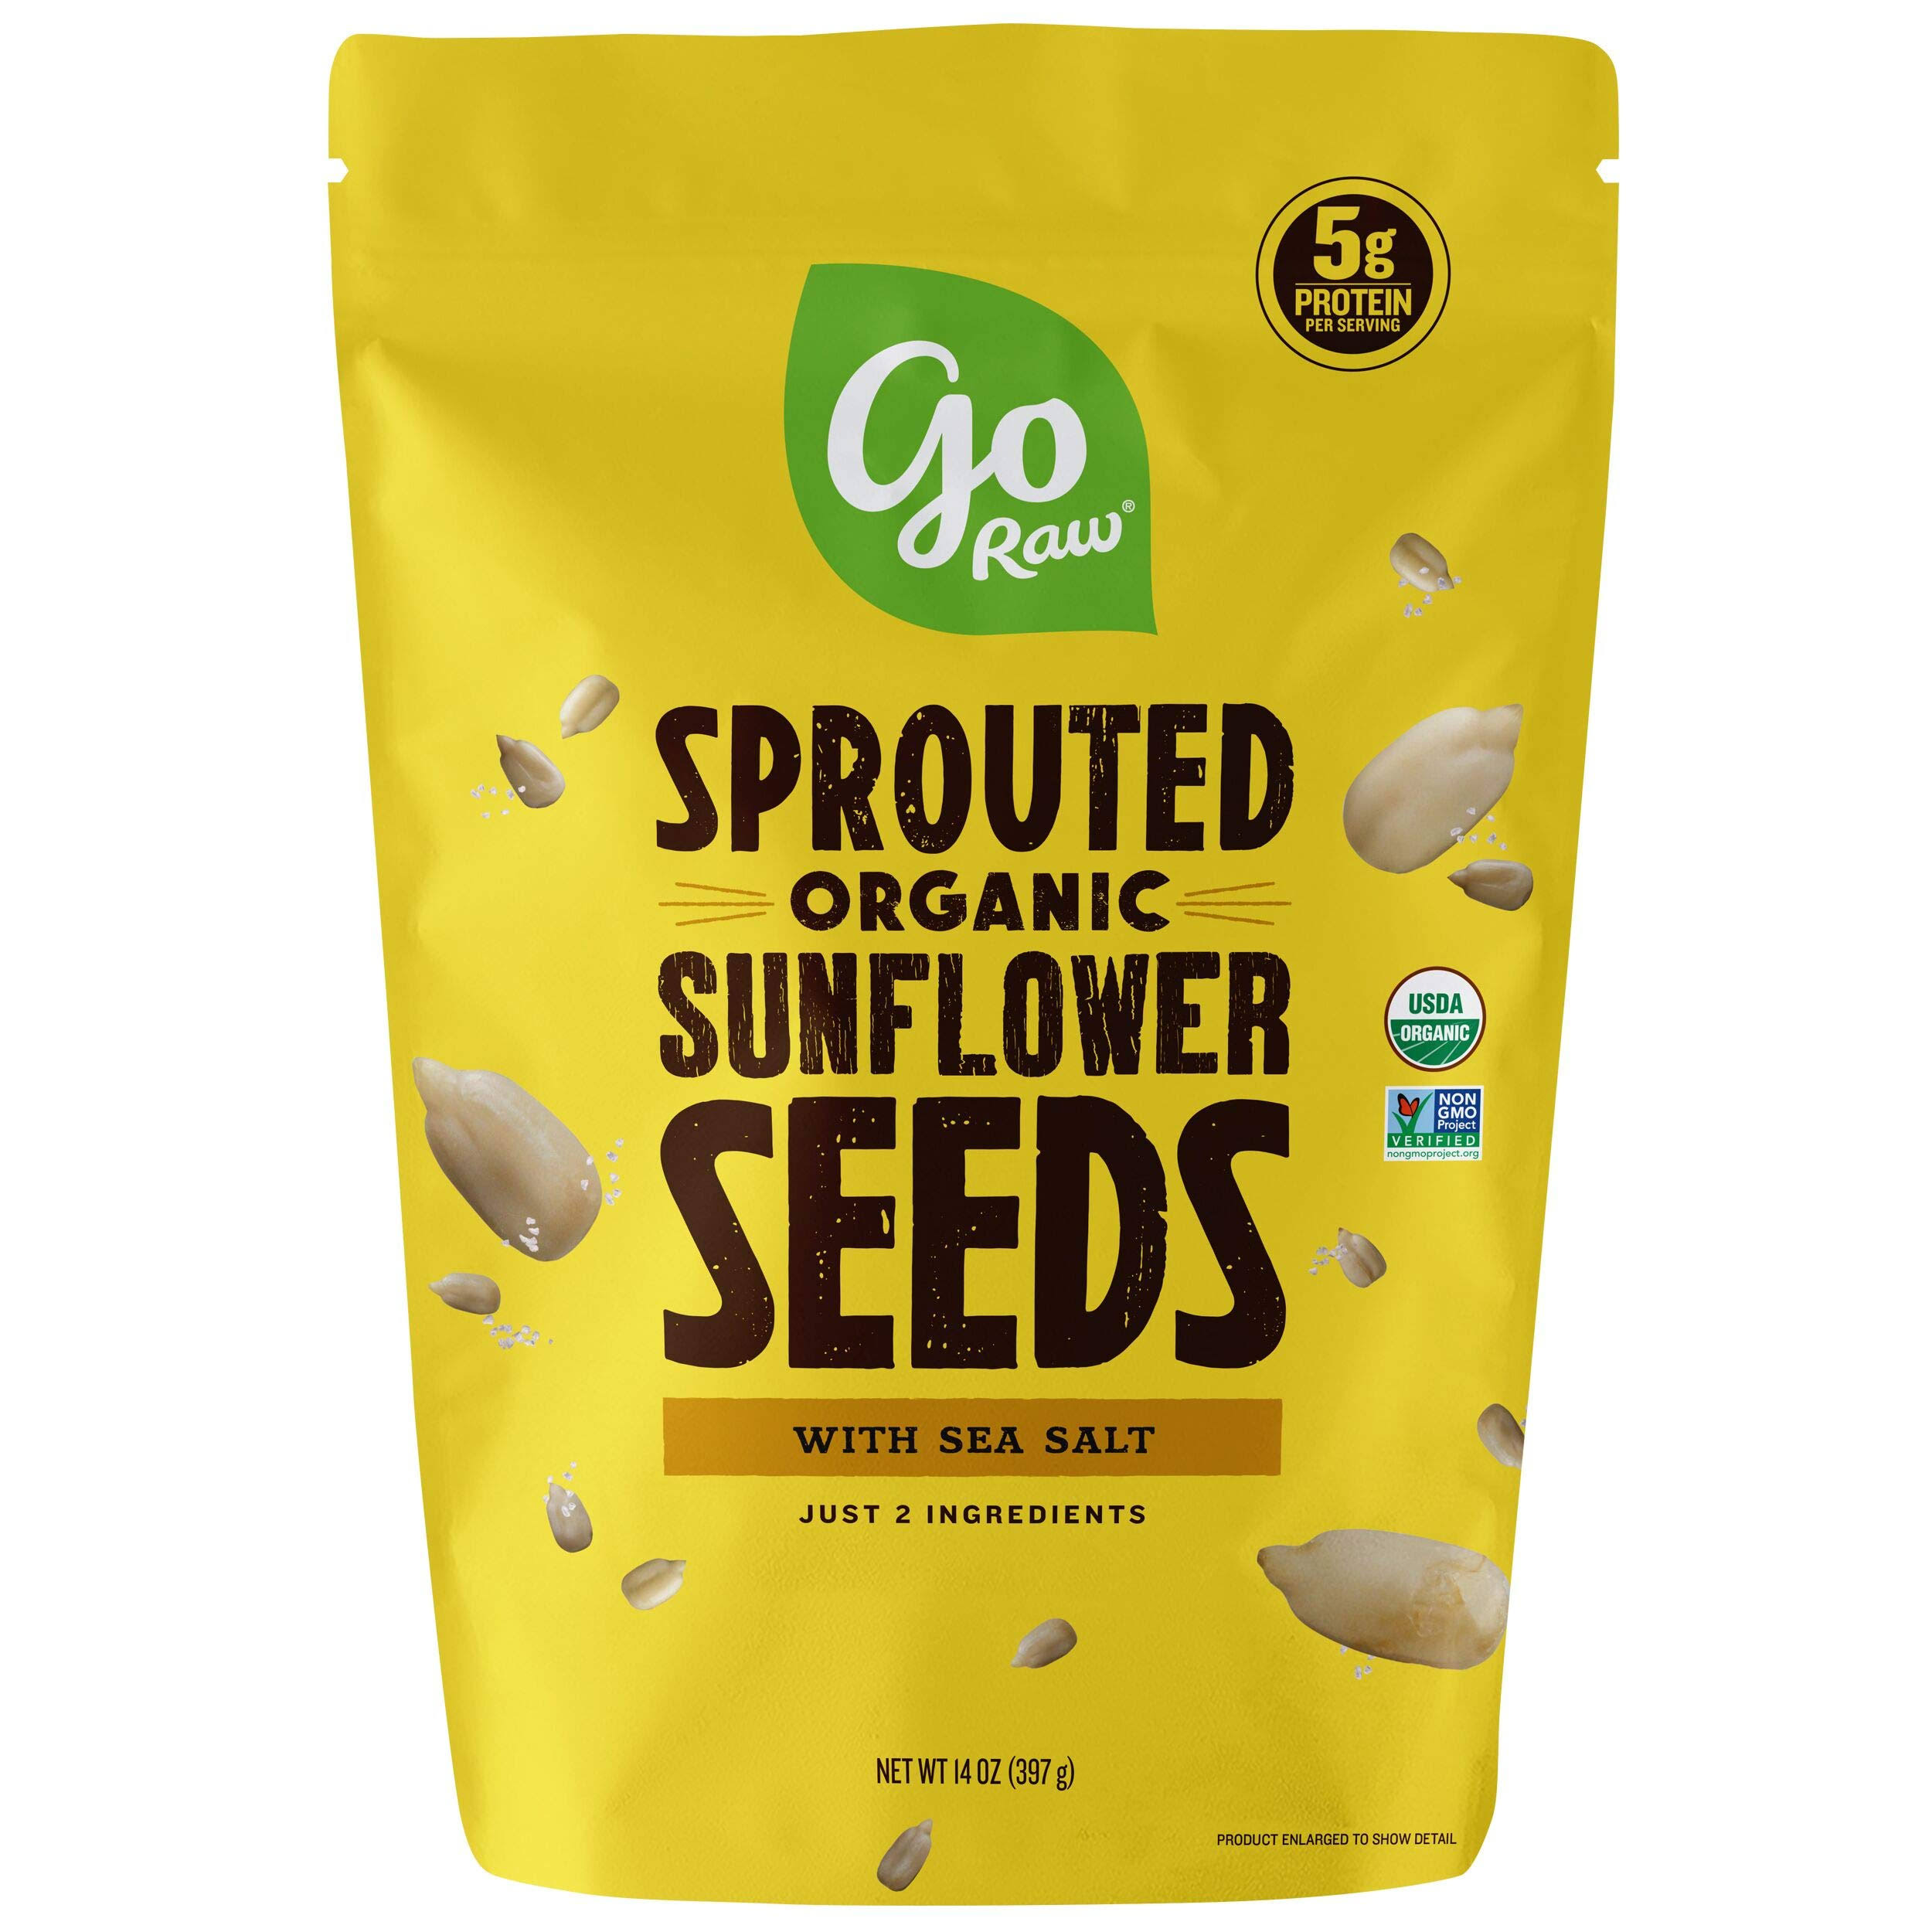 Go Raw Sprouted Sunflower Seed - 16oz